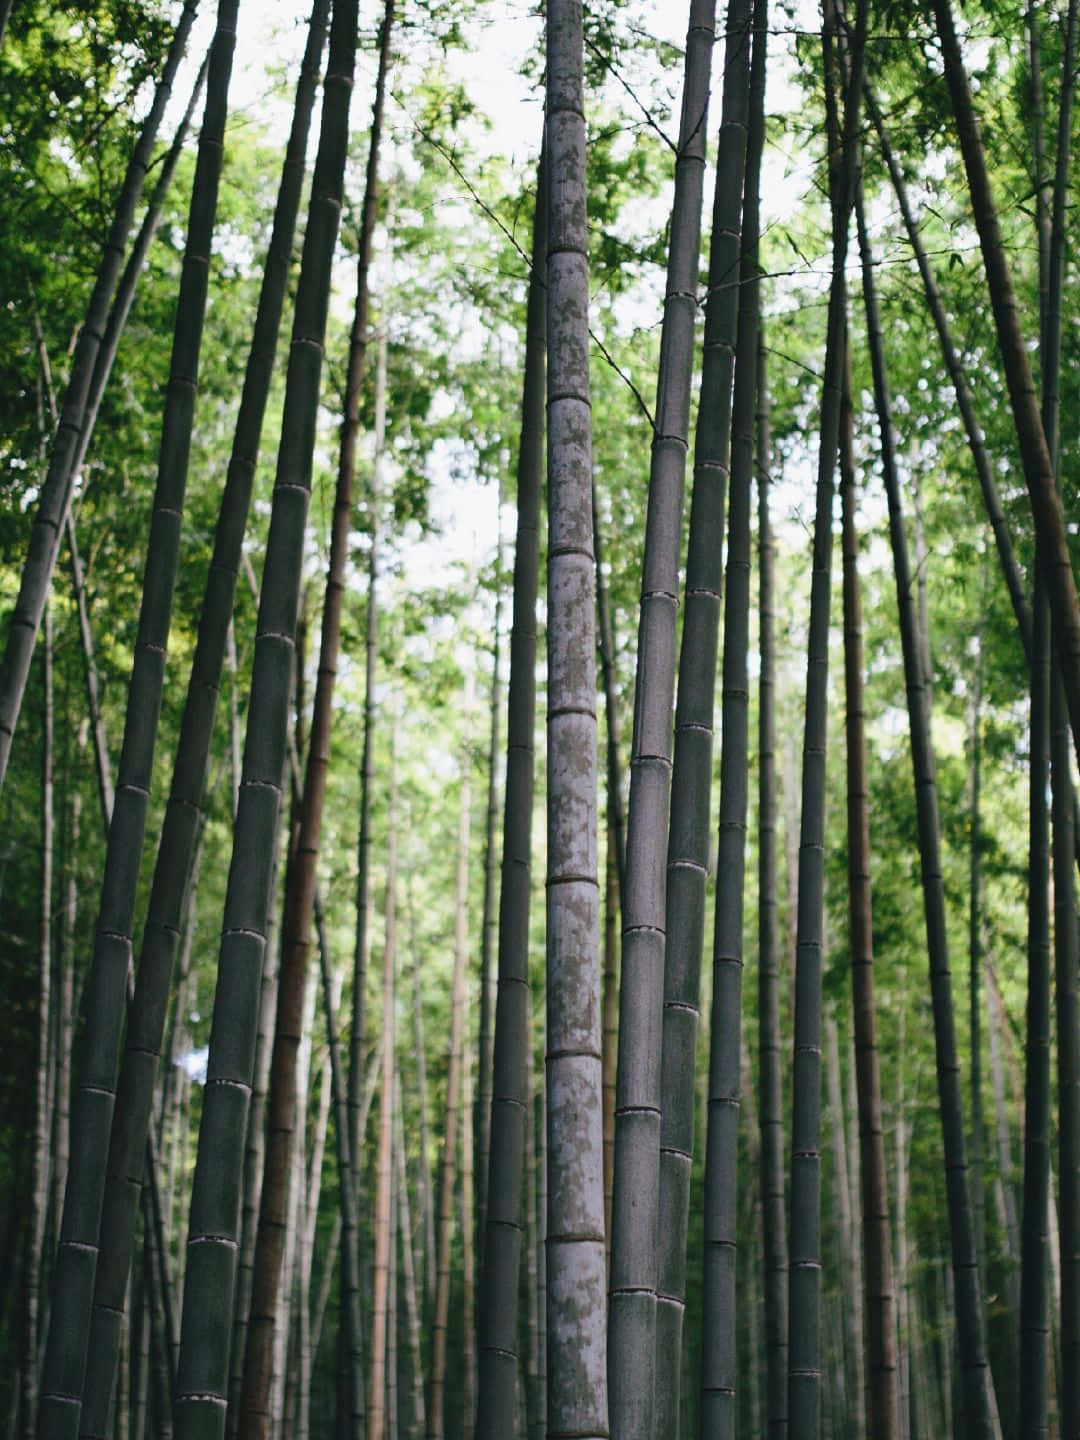 1440p Bamboo Background Aesthetic Bamboo Trees